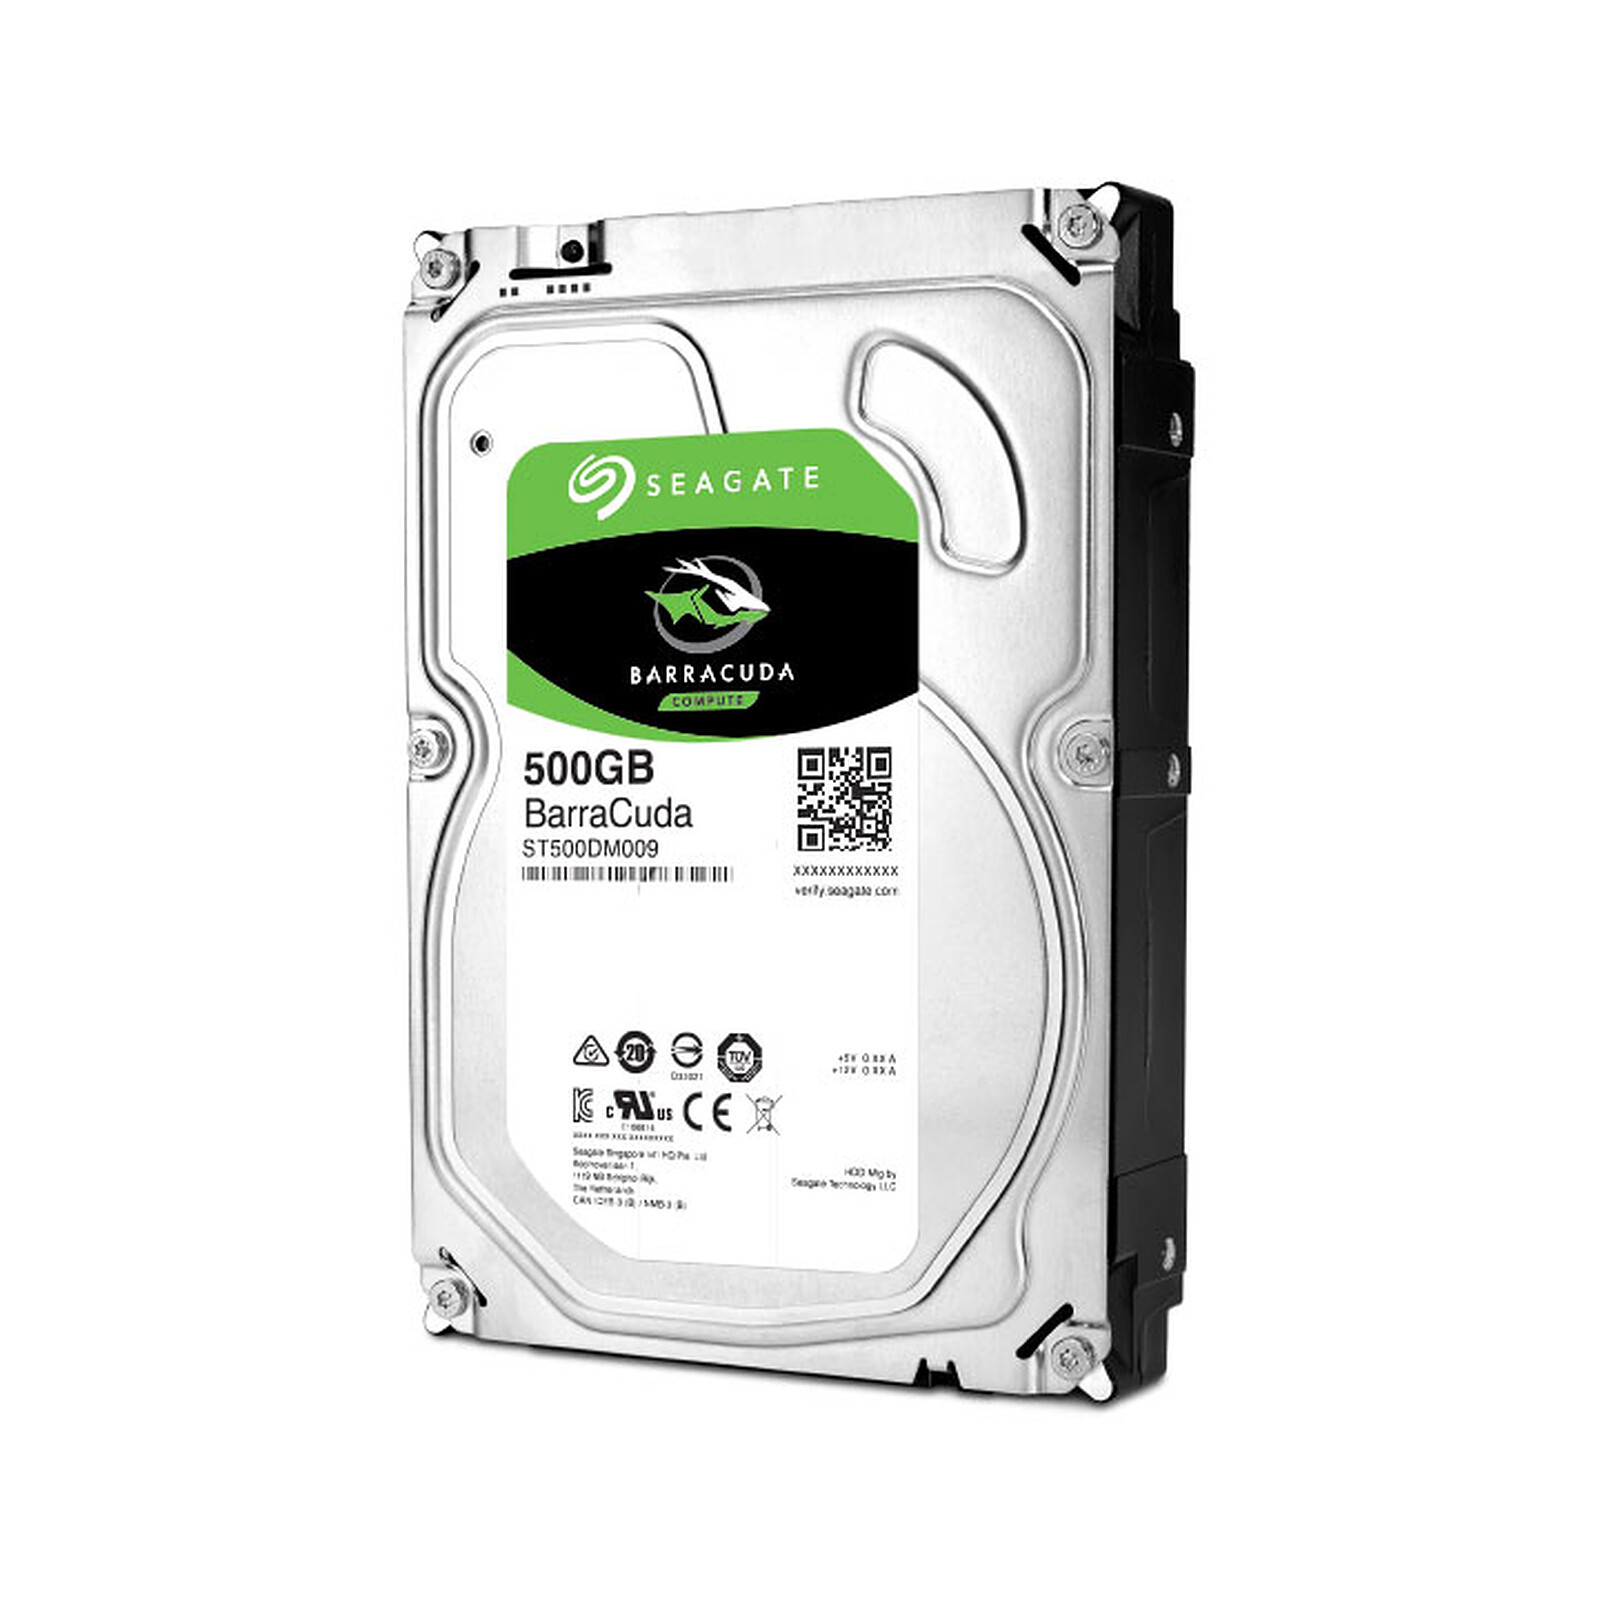 Seagate IronWolf 3 To (ST3000VN007) - Disque dur interne - LDLC